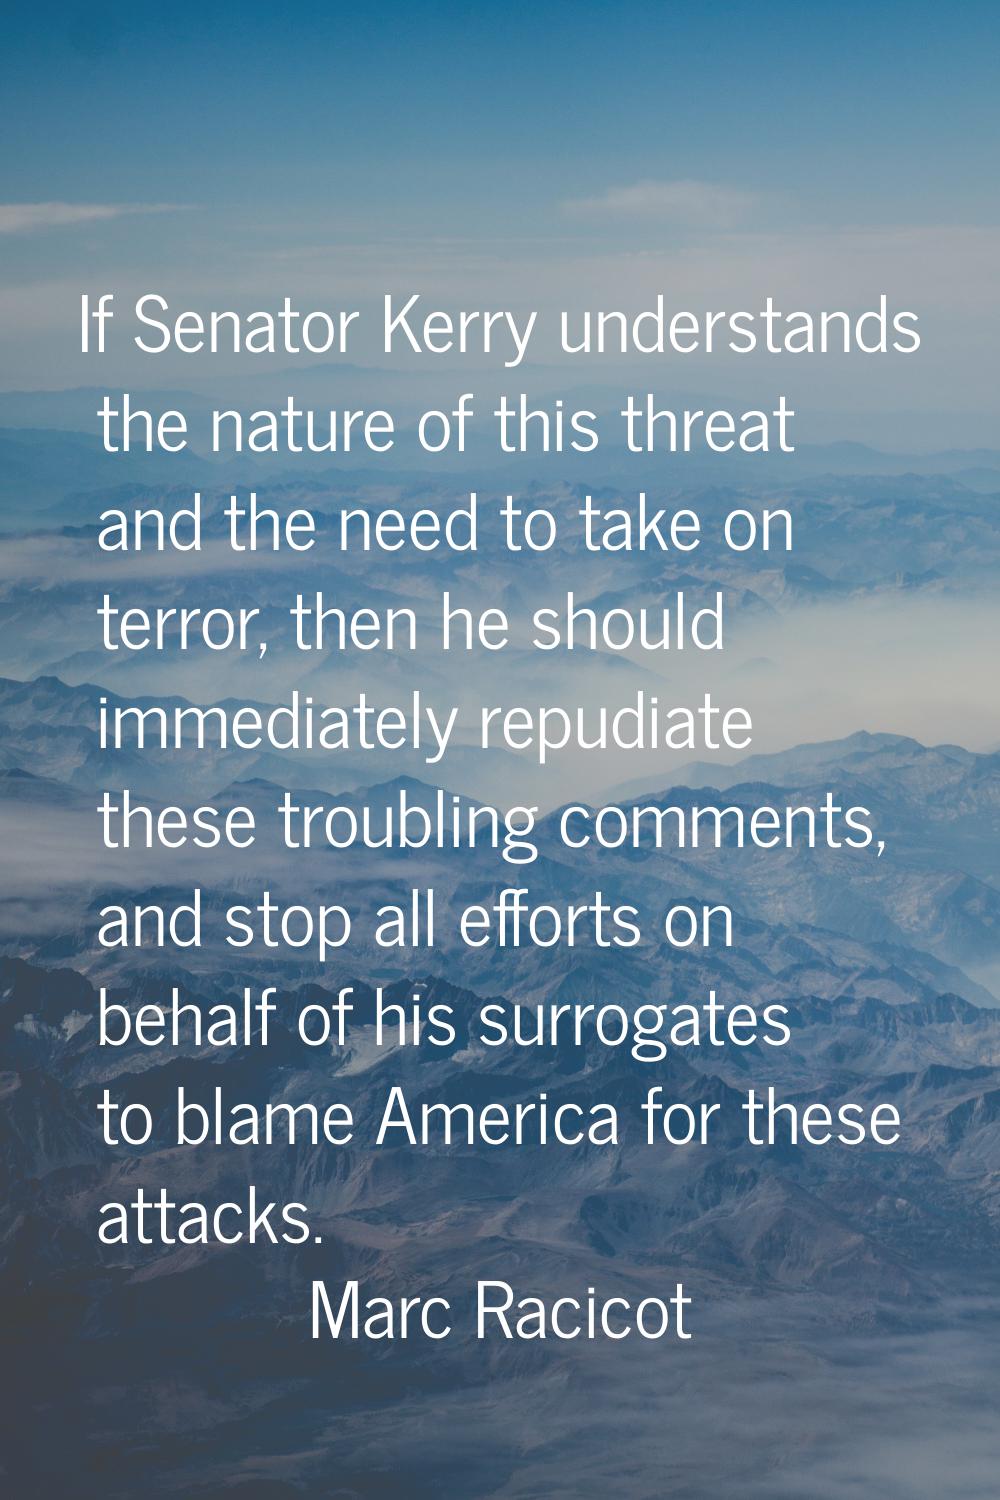 If Senator Kerry understands the nature of this threat and the need to take on terror, then he shou